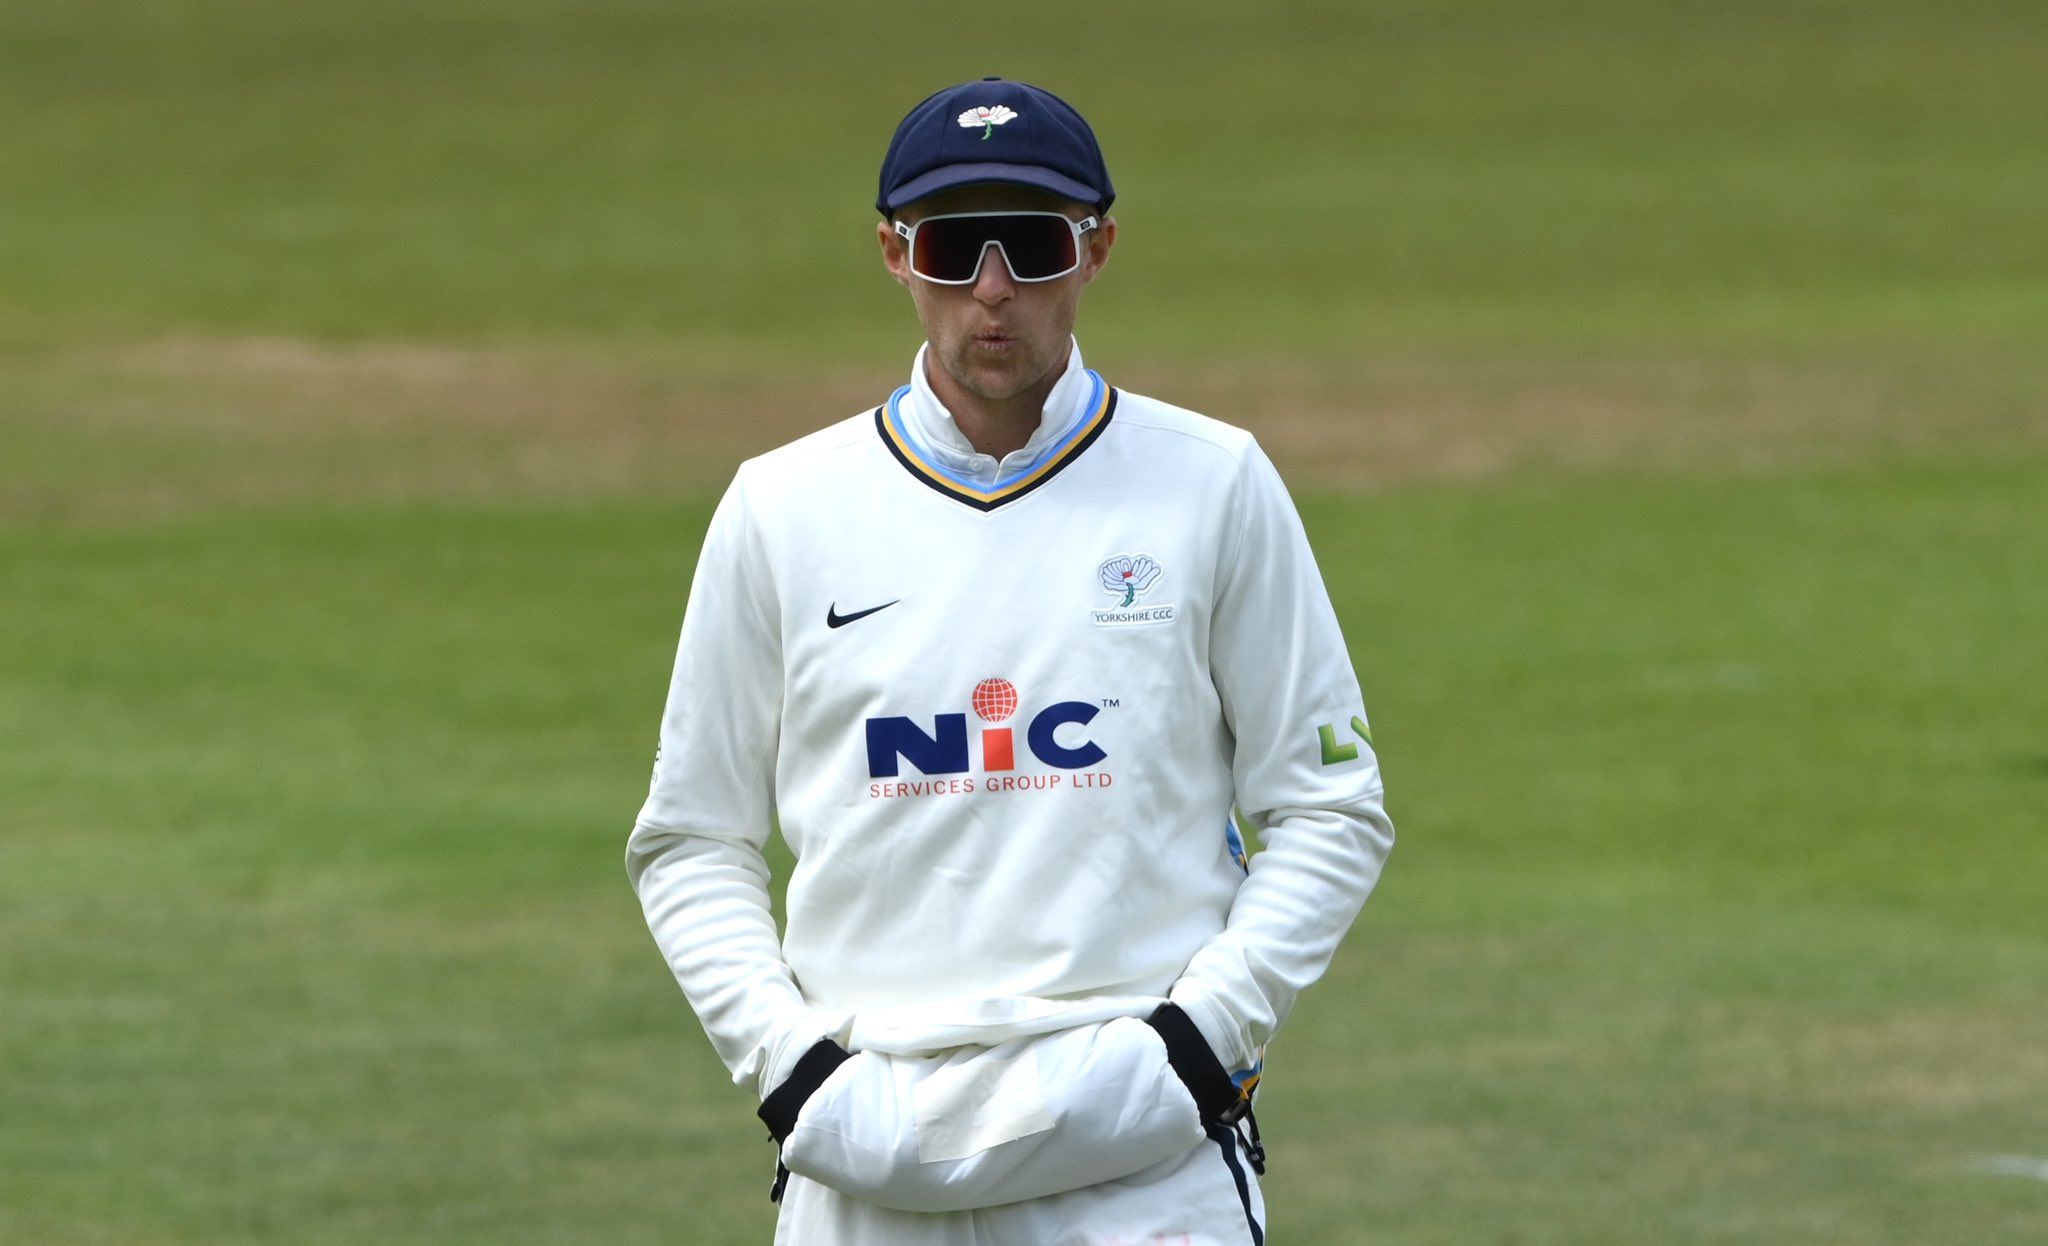 England skip Joe Root weighs ‘the cost’ of Ashes over Australia COVID constraints